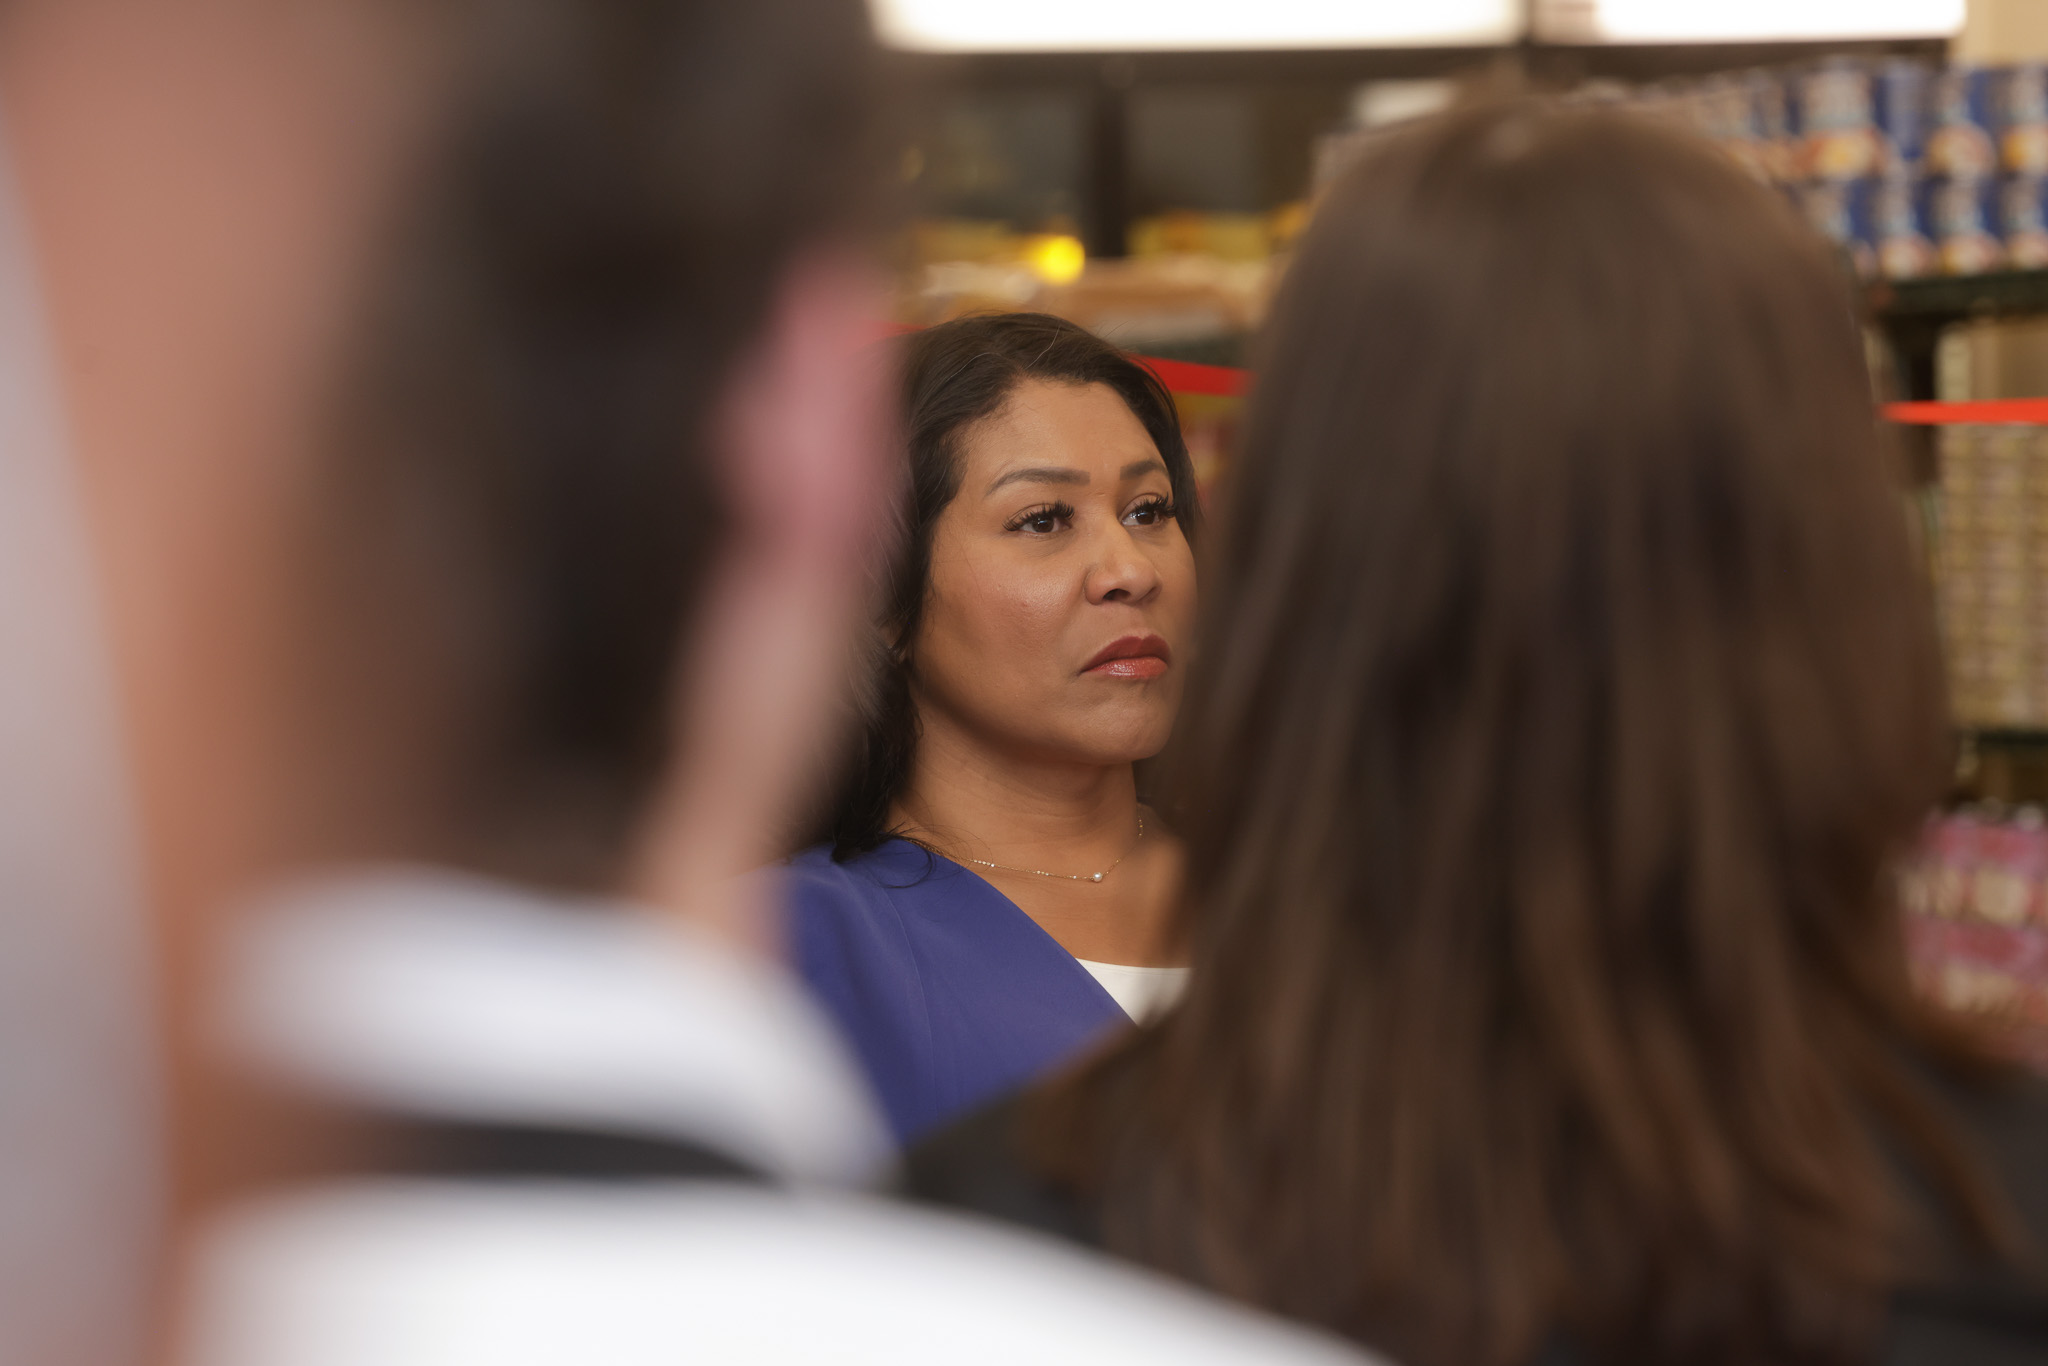 A woman with a serious expression stands in focus, surrounded by blurred figures in the foreground, against a backdrop of store shelves.